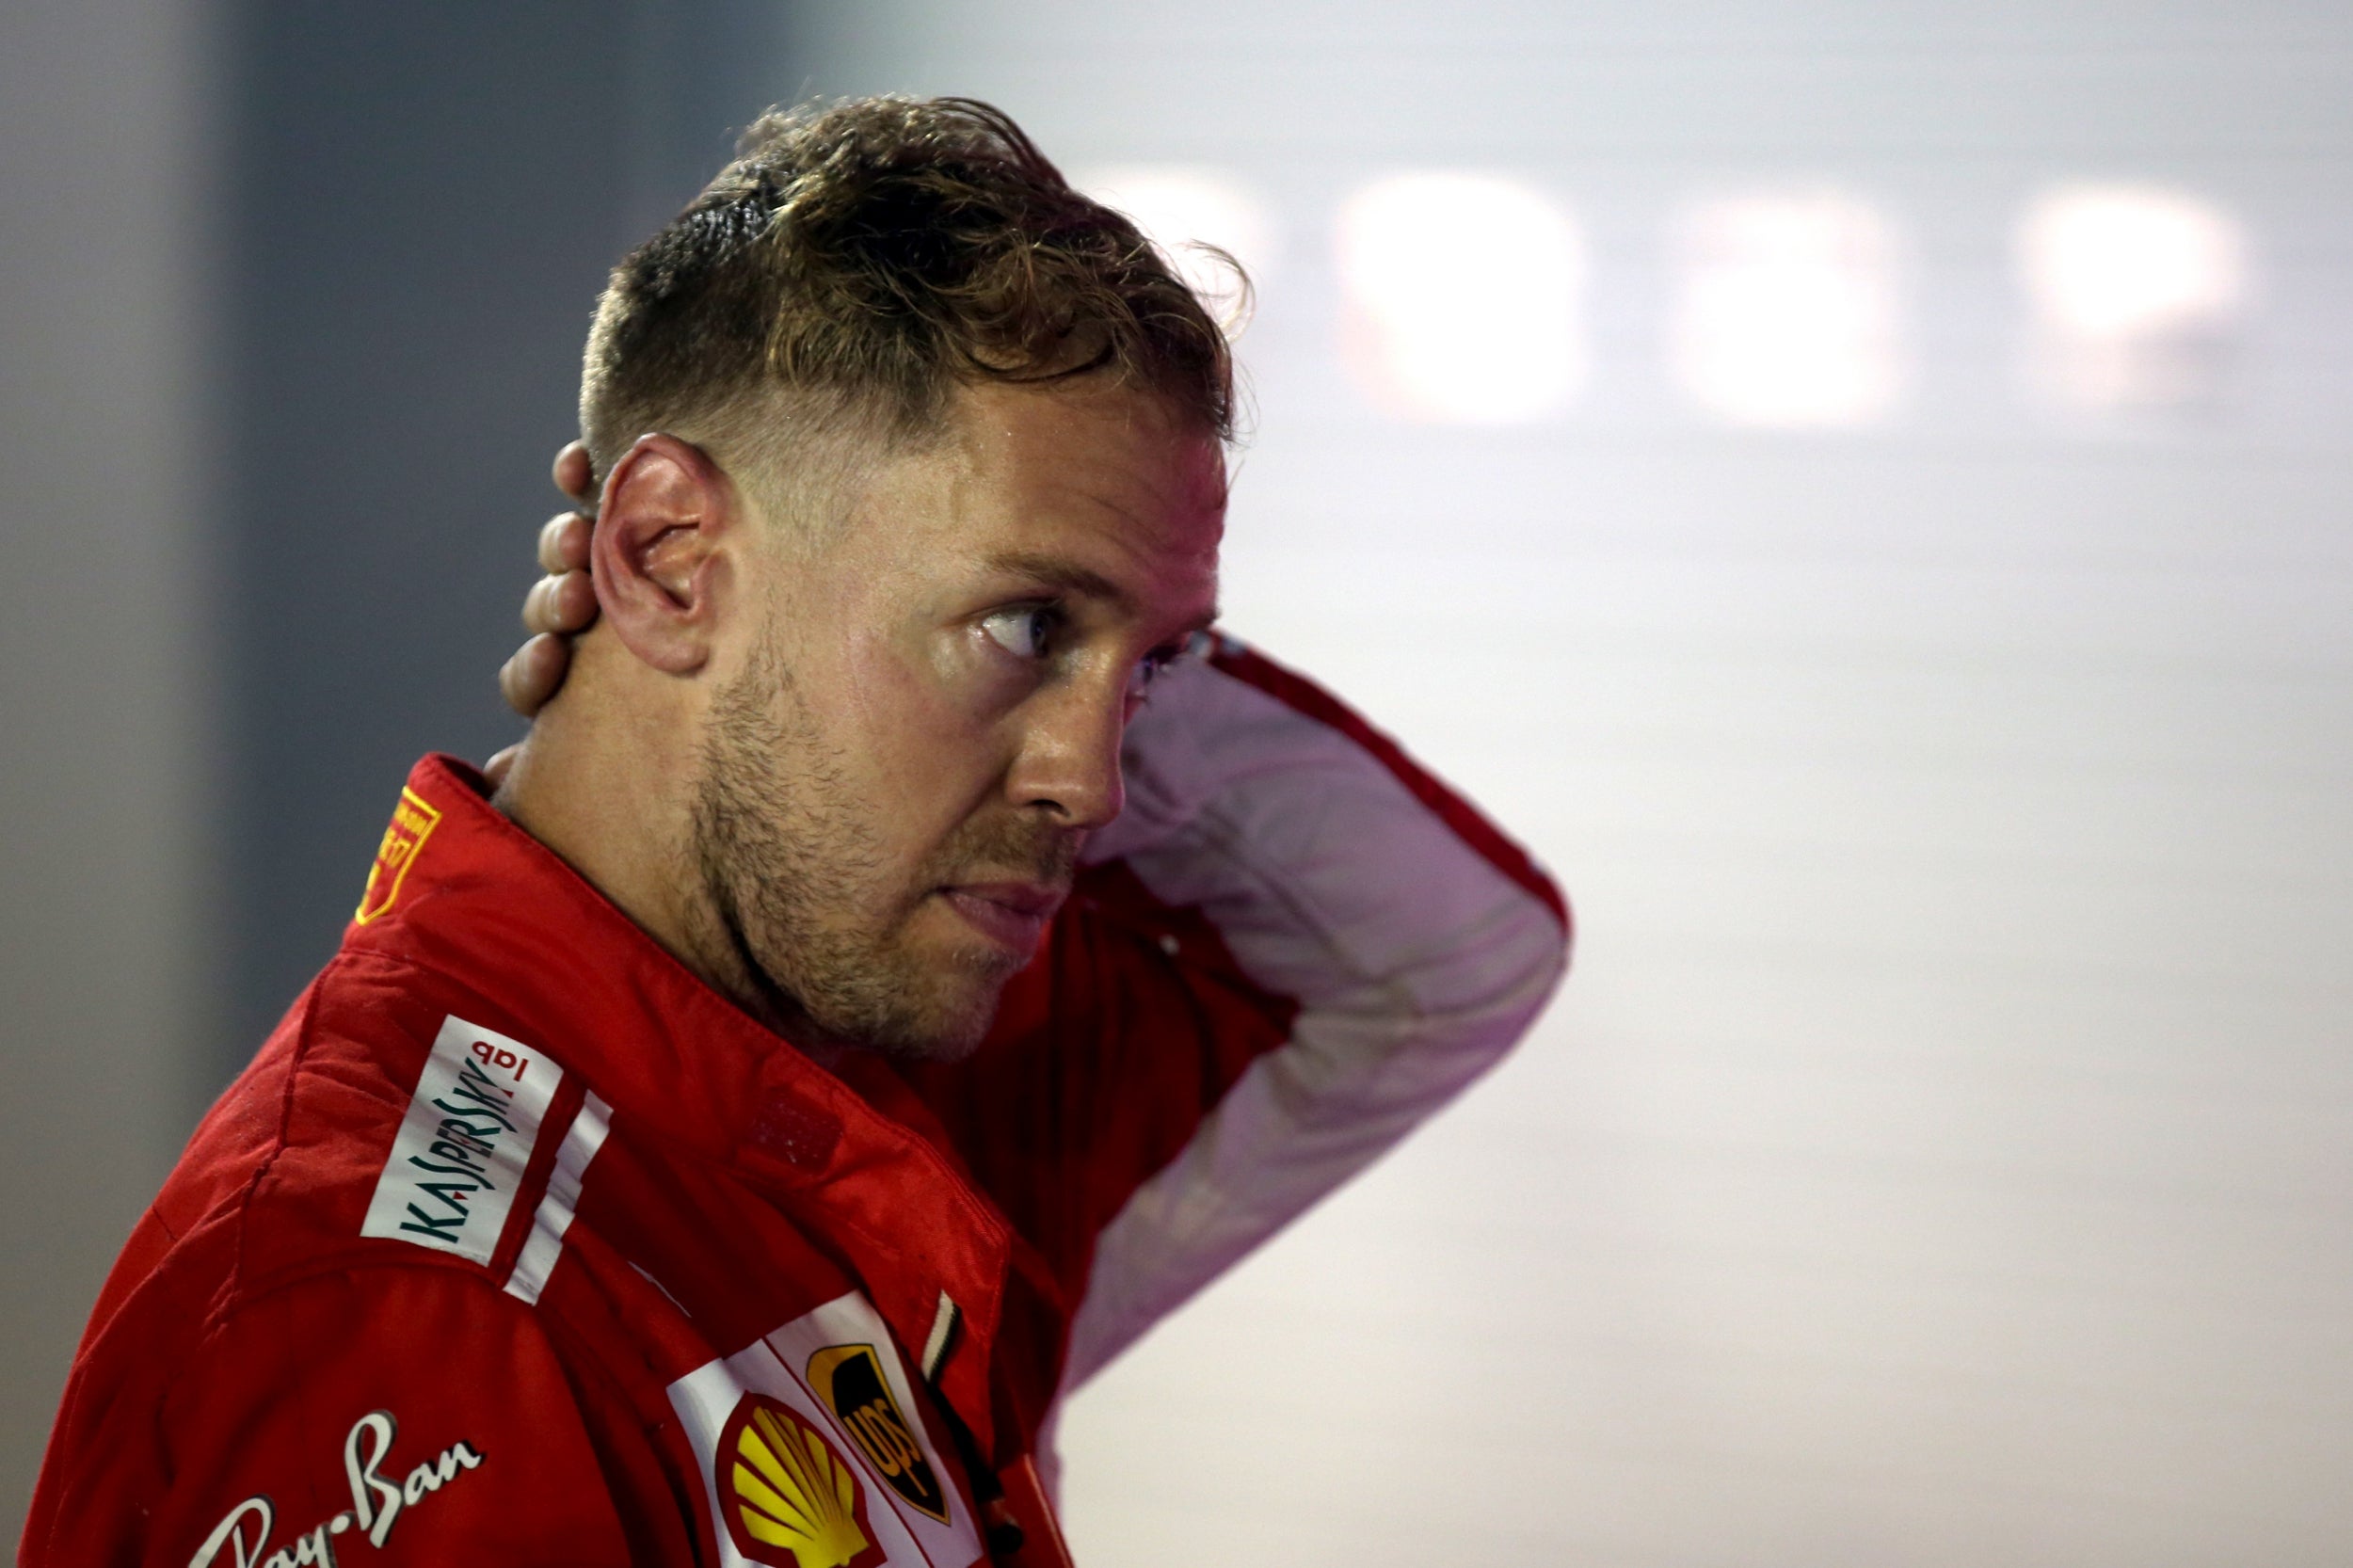 Vettel is starting to act like a beaten man